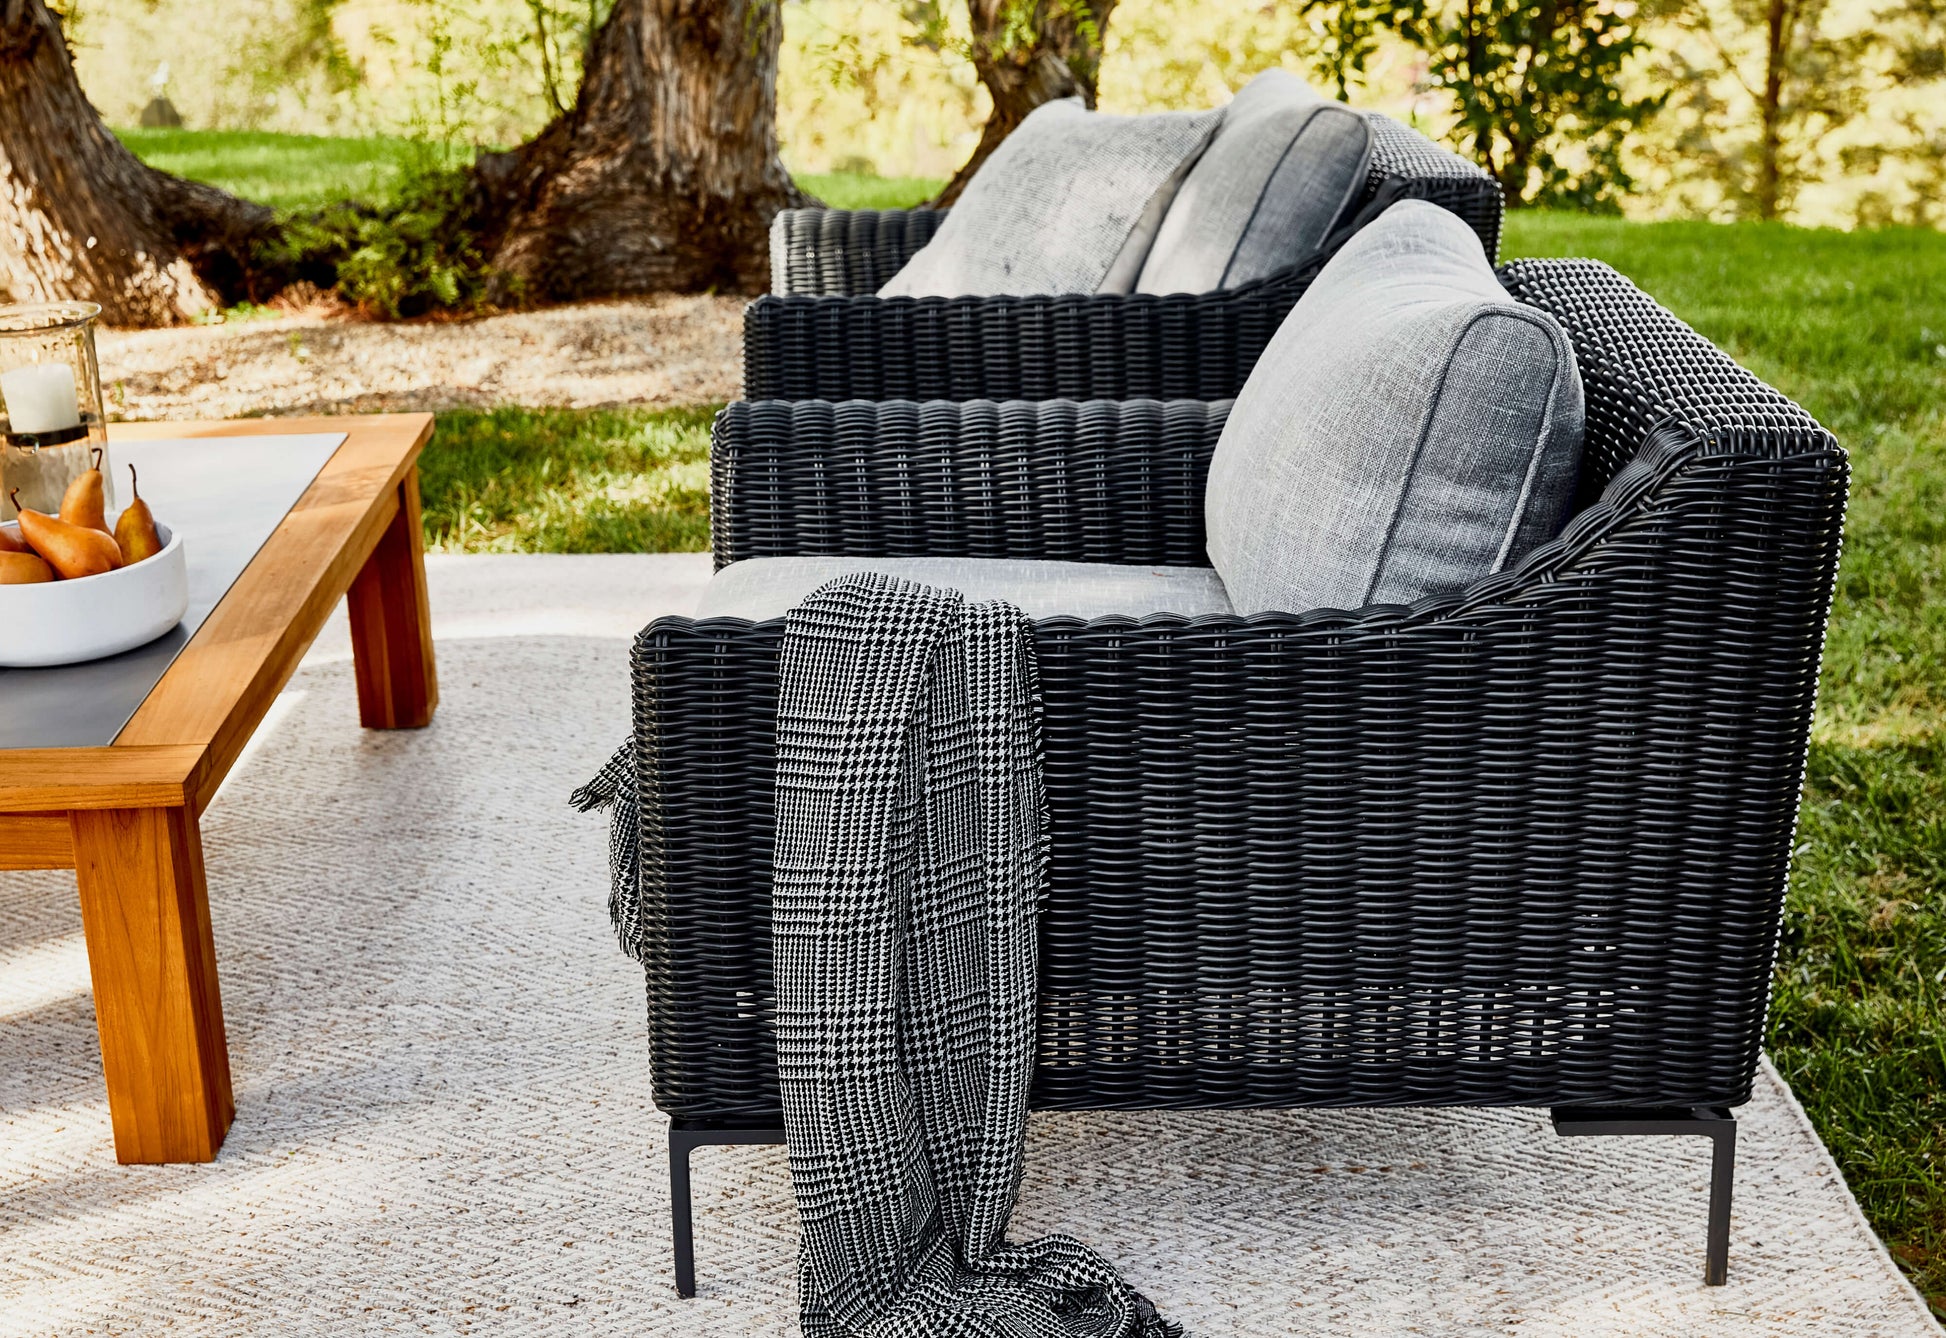 Live Outer 29" Black Wicker Outdoor Armless Chair Conversation Set With Pacific Fog Gray Cushion